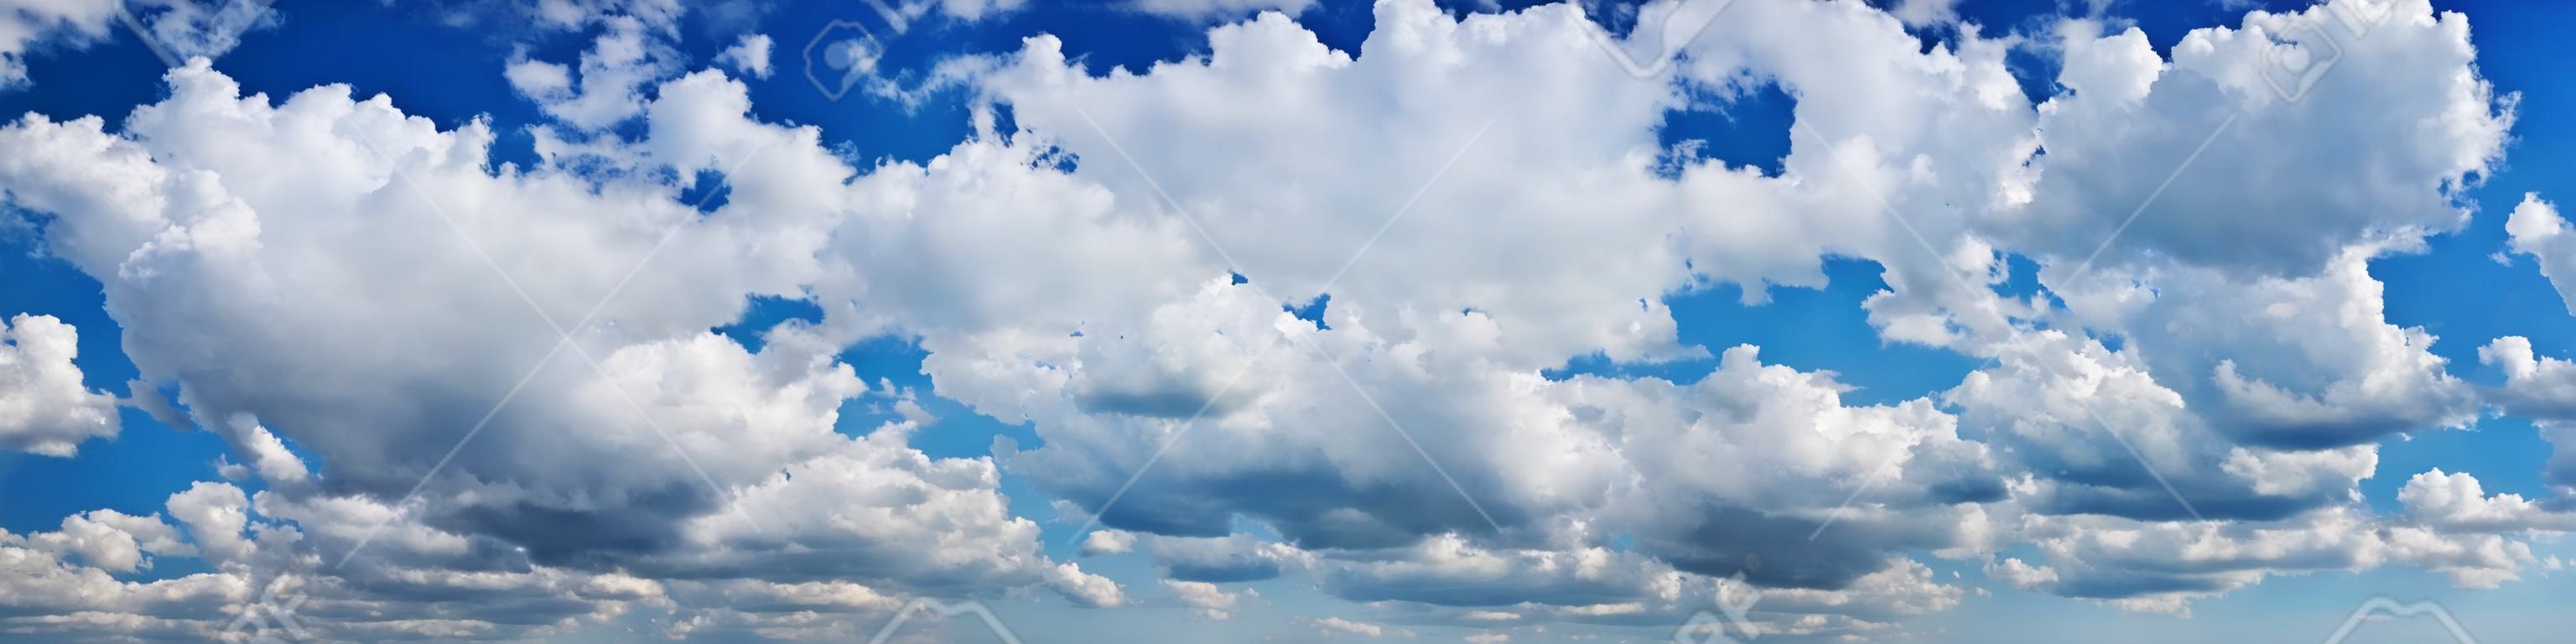 Blue sky with many cumulus fluffy white clouds. Very wide format.